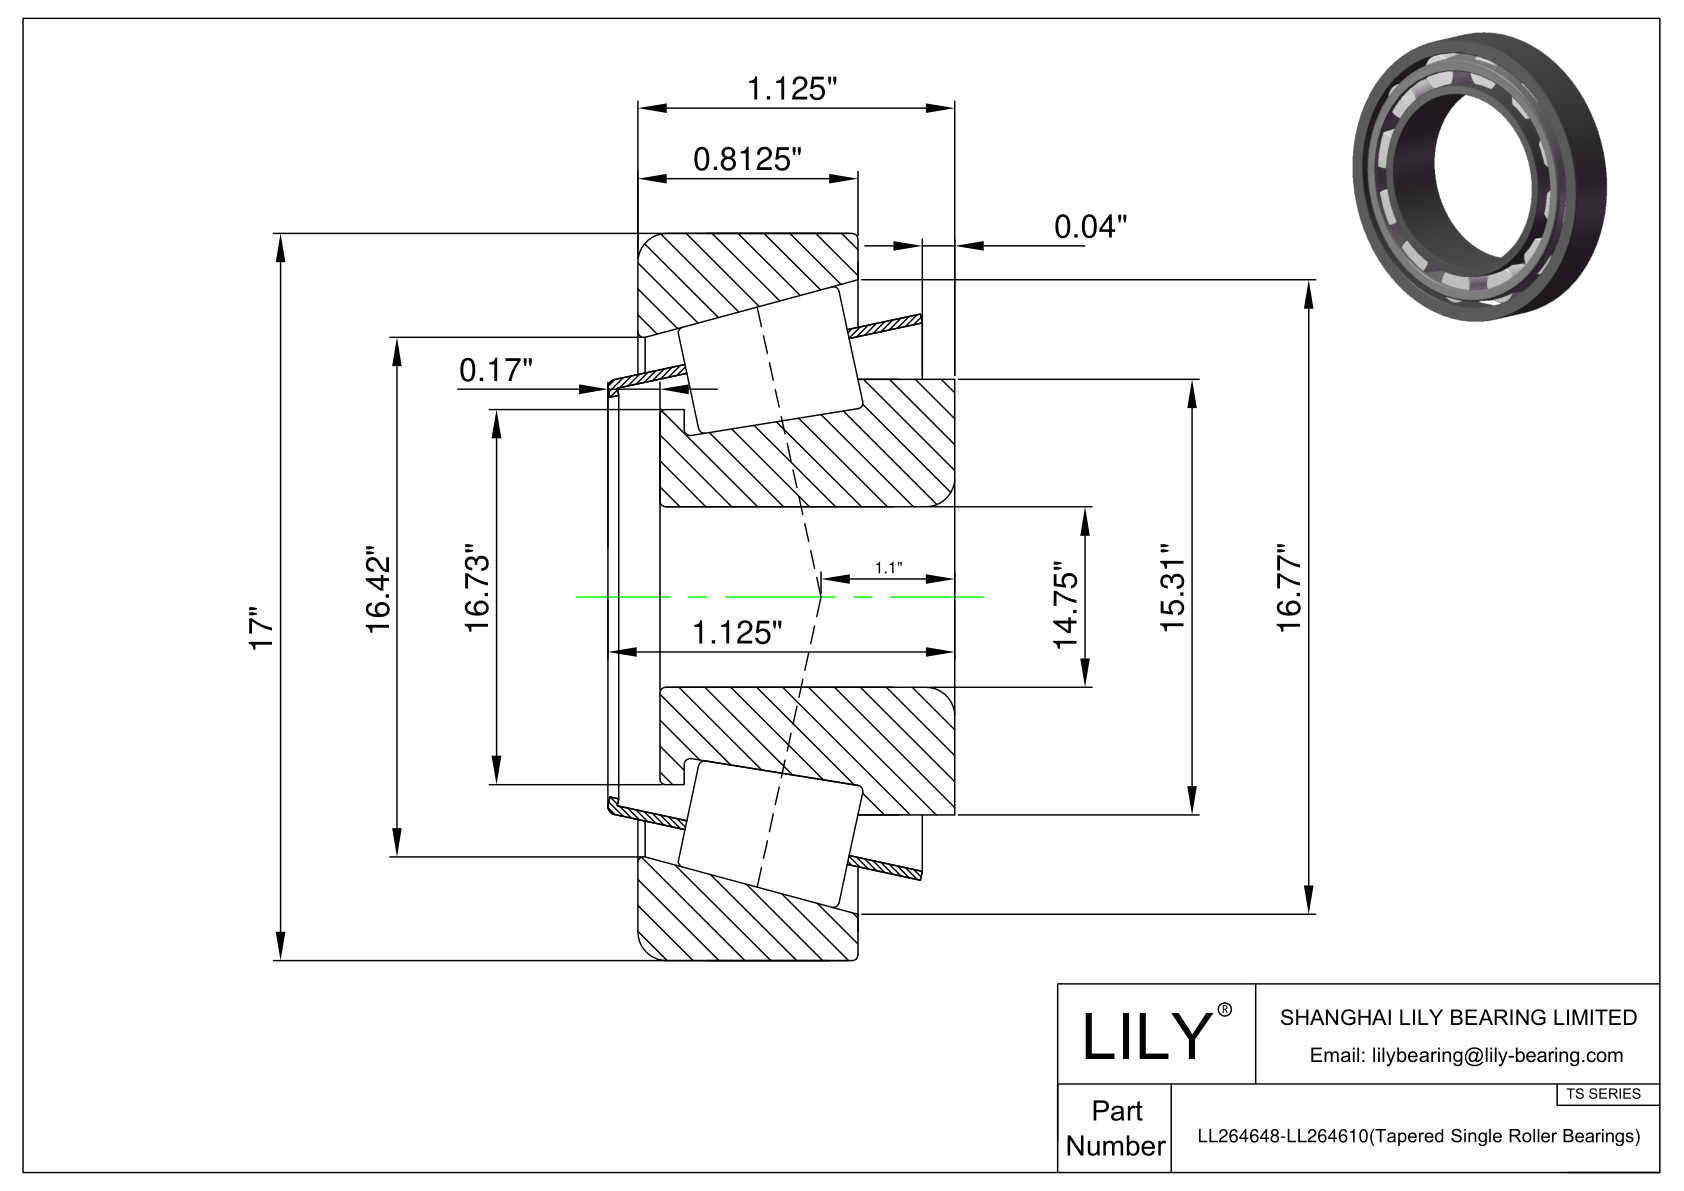 LL264648-LL264610 TS (Tapered Single Roller Bearings) (Imperial) cad drawing